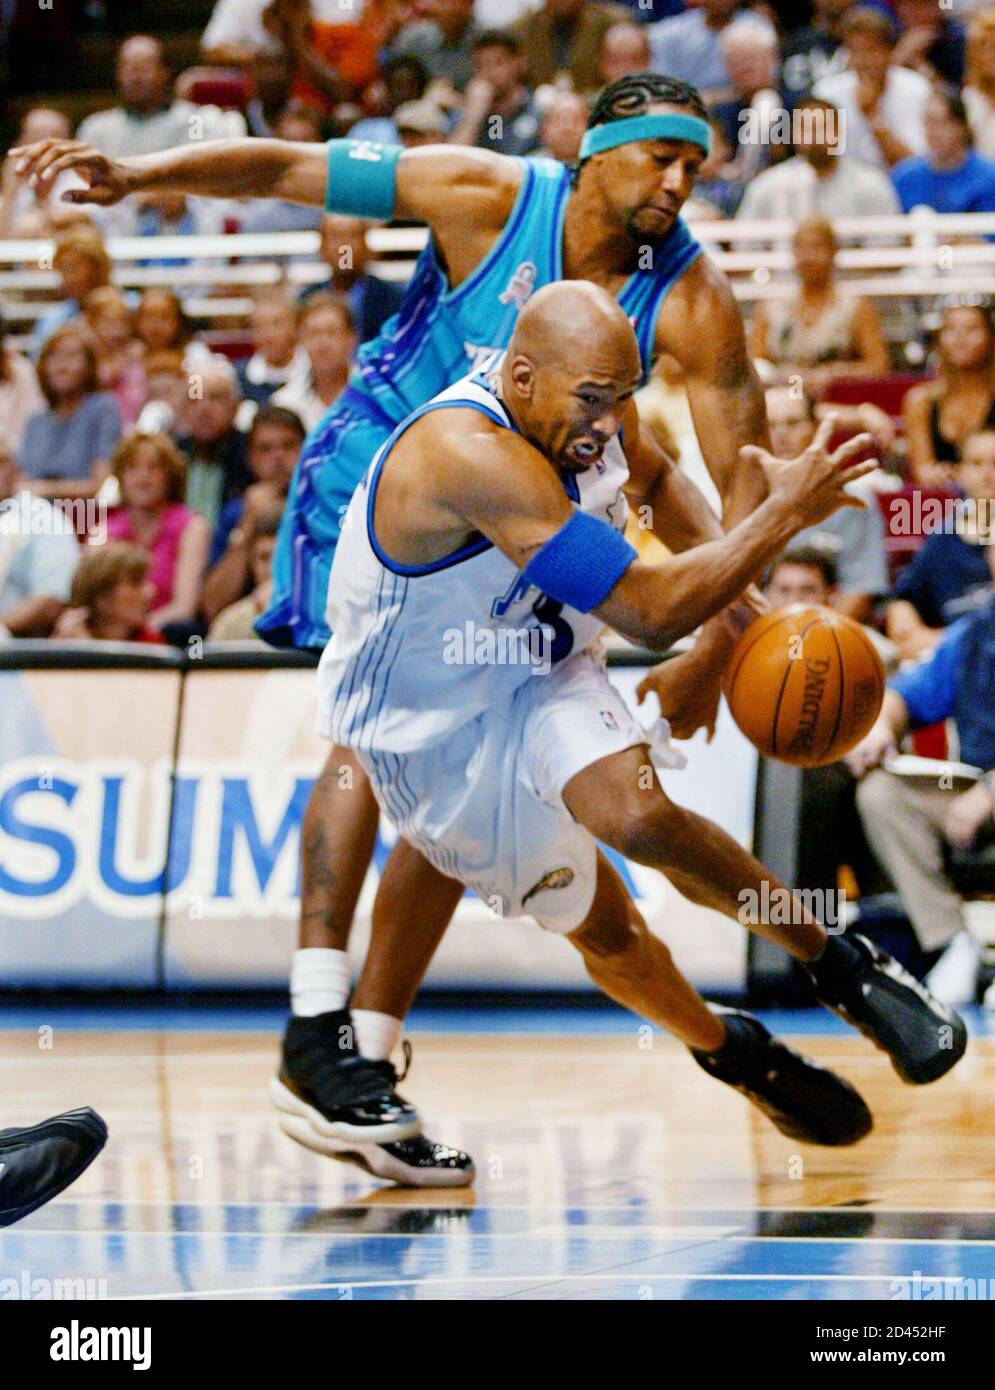 Orlando Magic forward Monte Williams has the ball knocked loose by  Charlotte Hornets' Lee Nailon during their NBA first round playoff game  played in Orlando, April 27, 2002. The teams met in